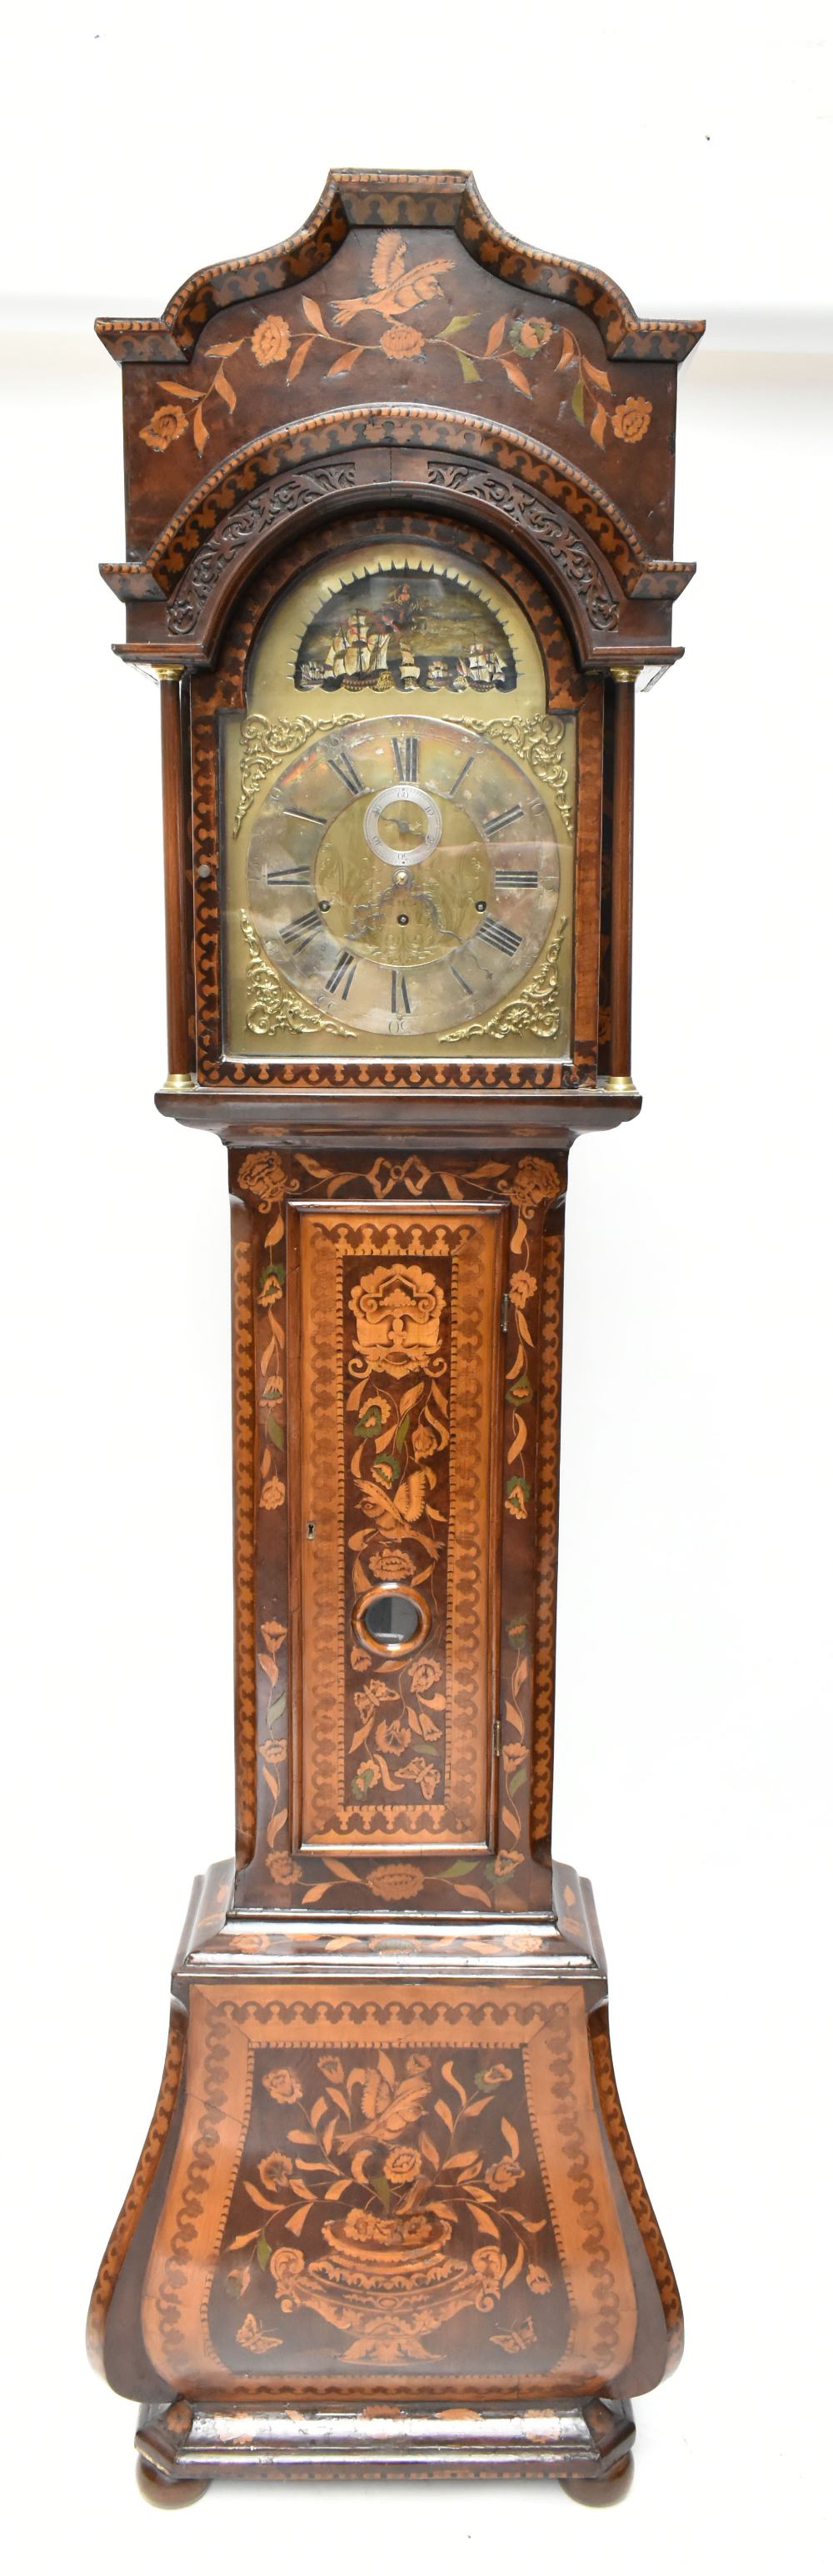 A 19th century Dutch longcase clock, the walnut case with marquetry inlay, the brass face with